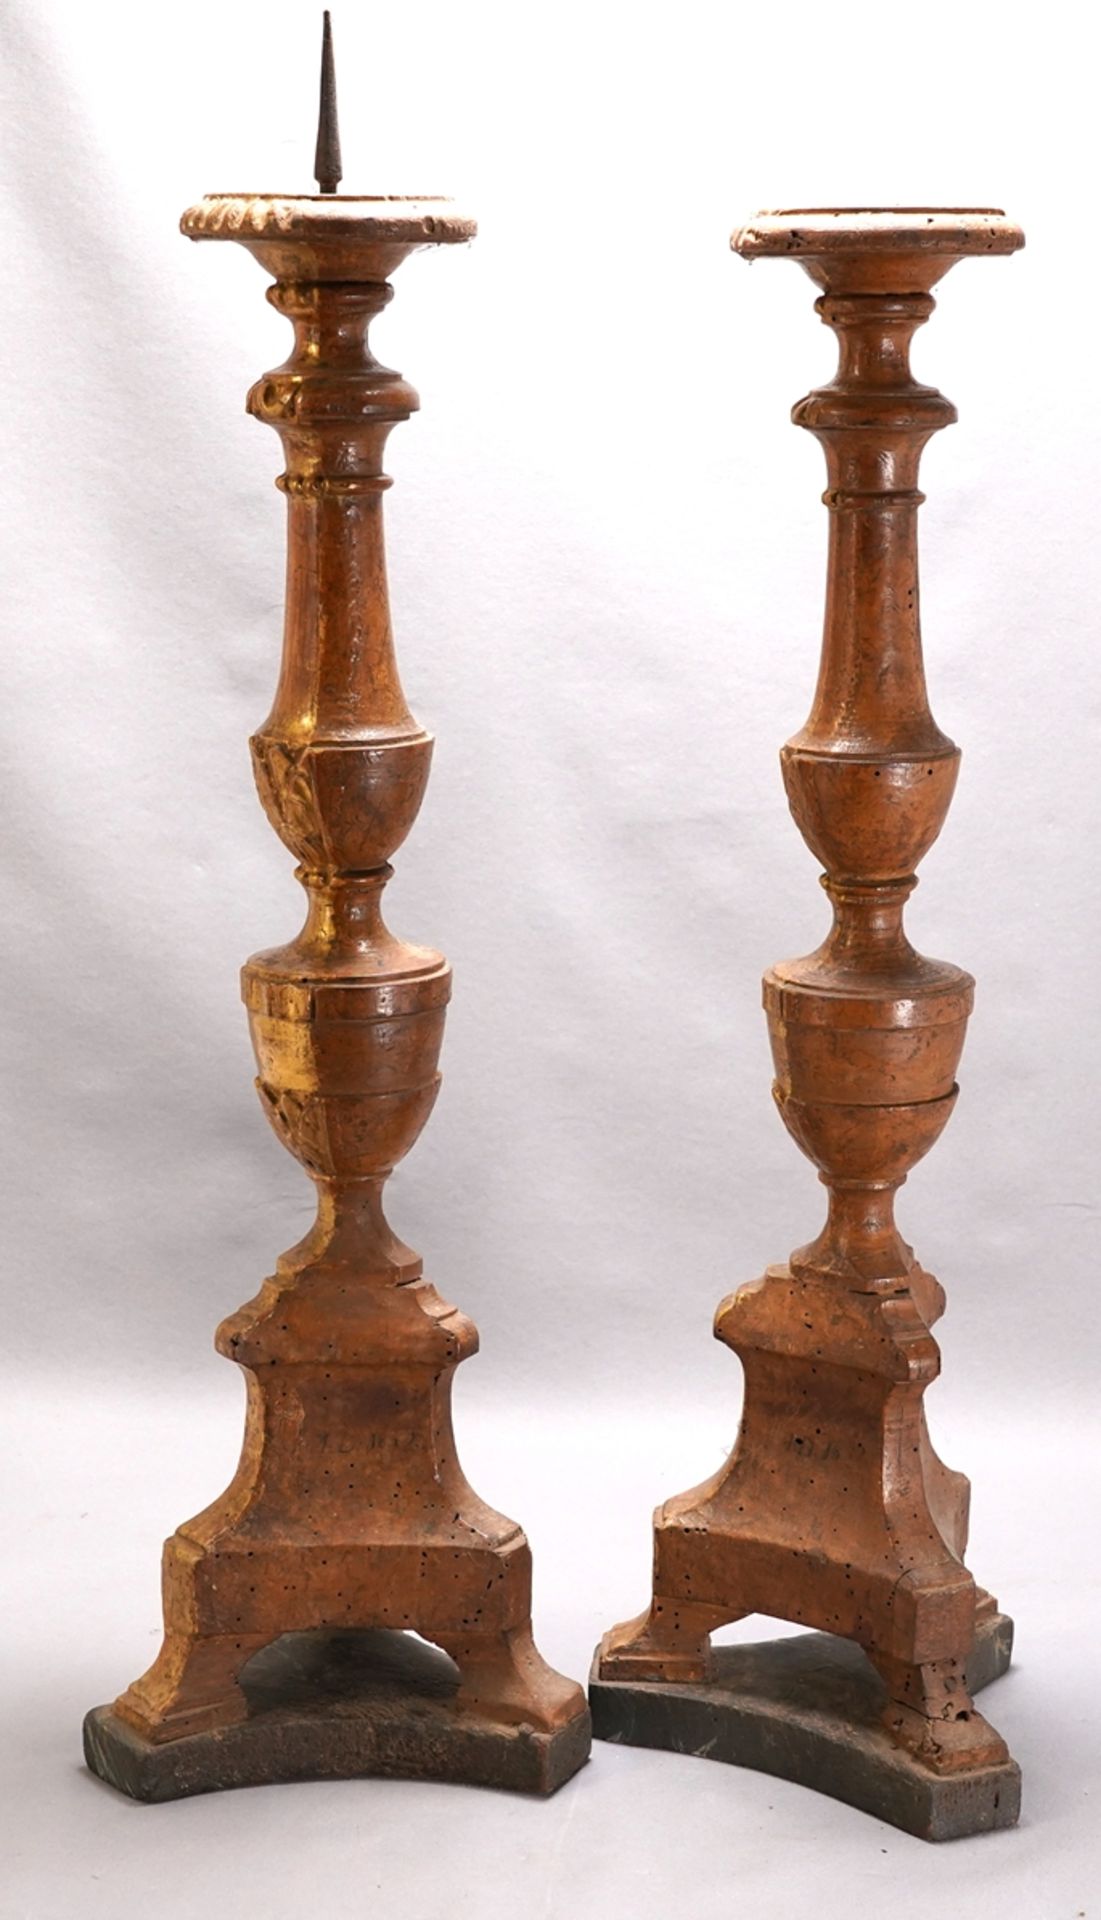 Pair of baroque candlesticks - Image 5 of 5